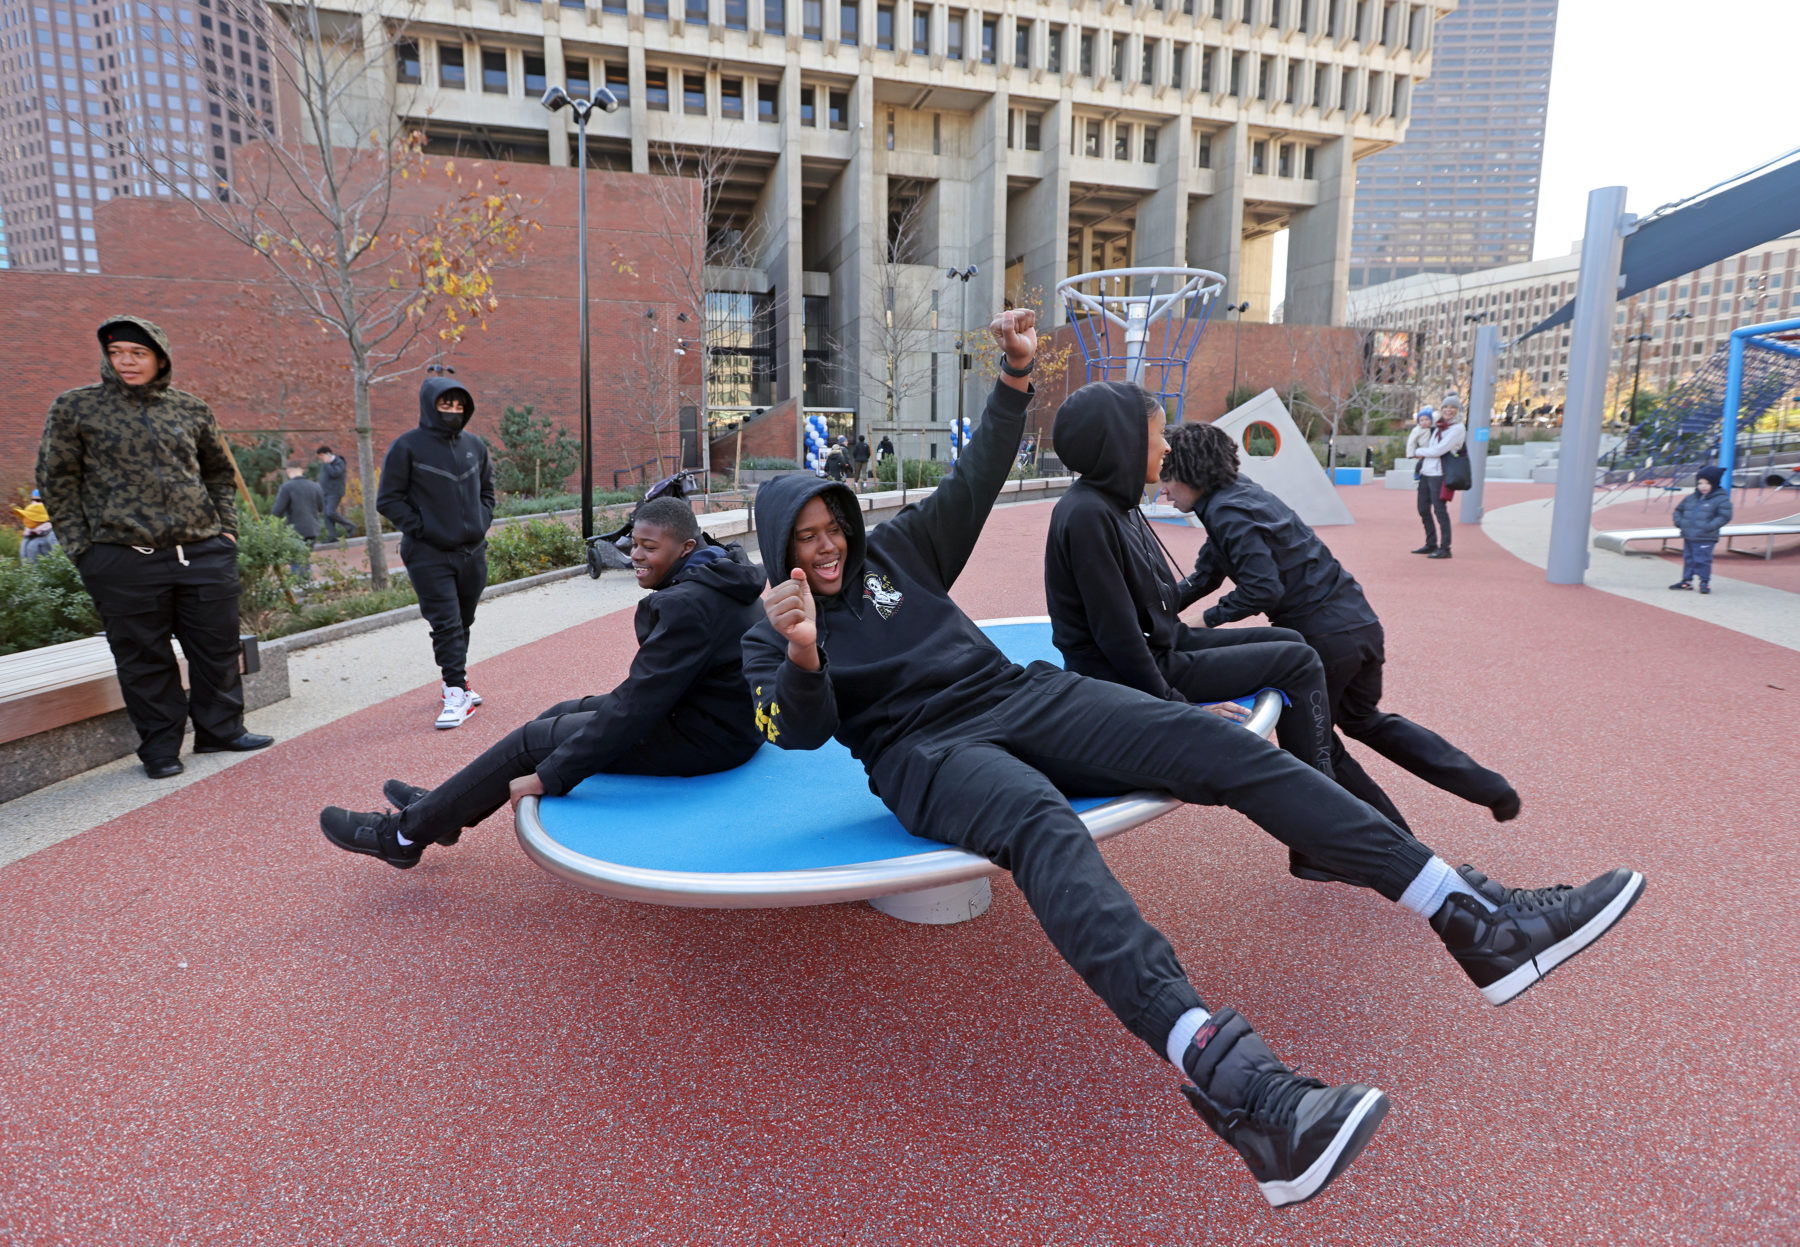 Three older kids spinning around on a play feature in the plaza's new play space